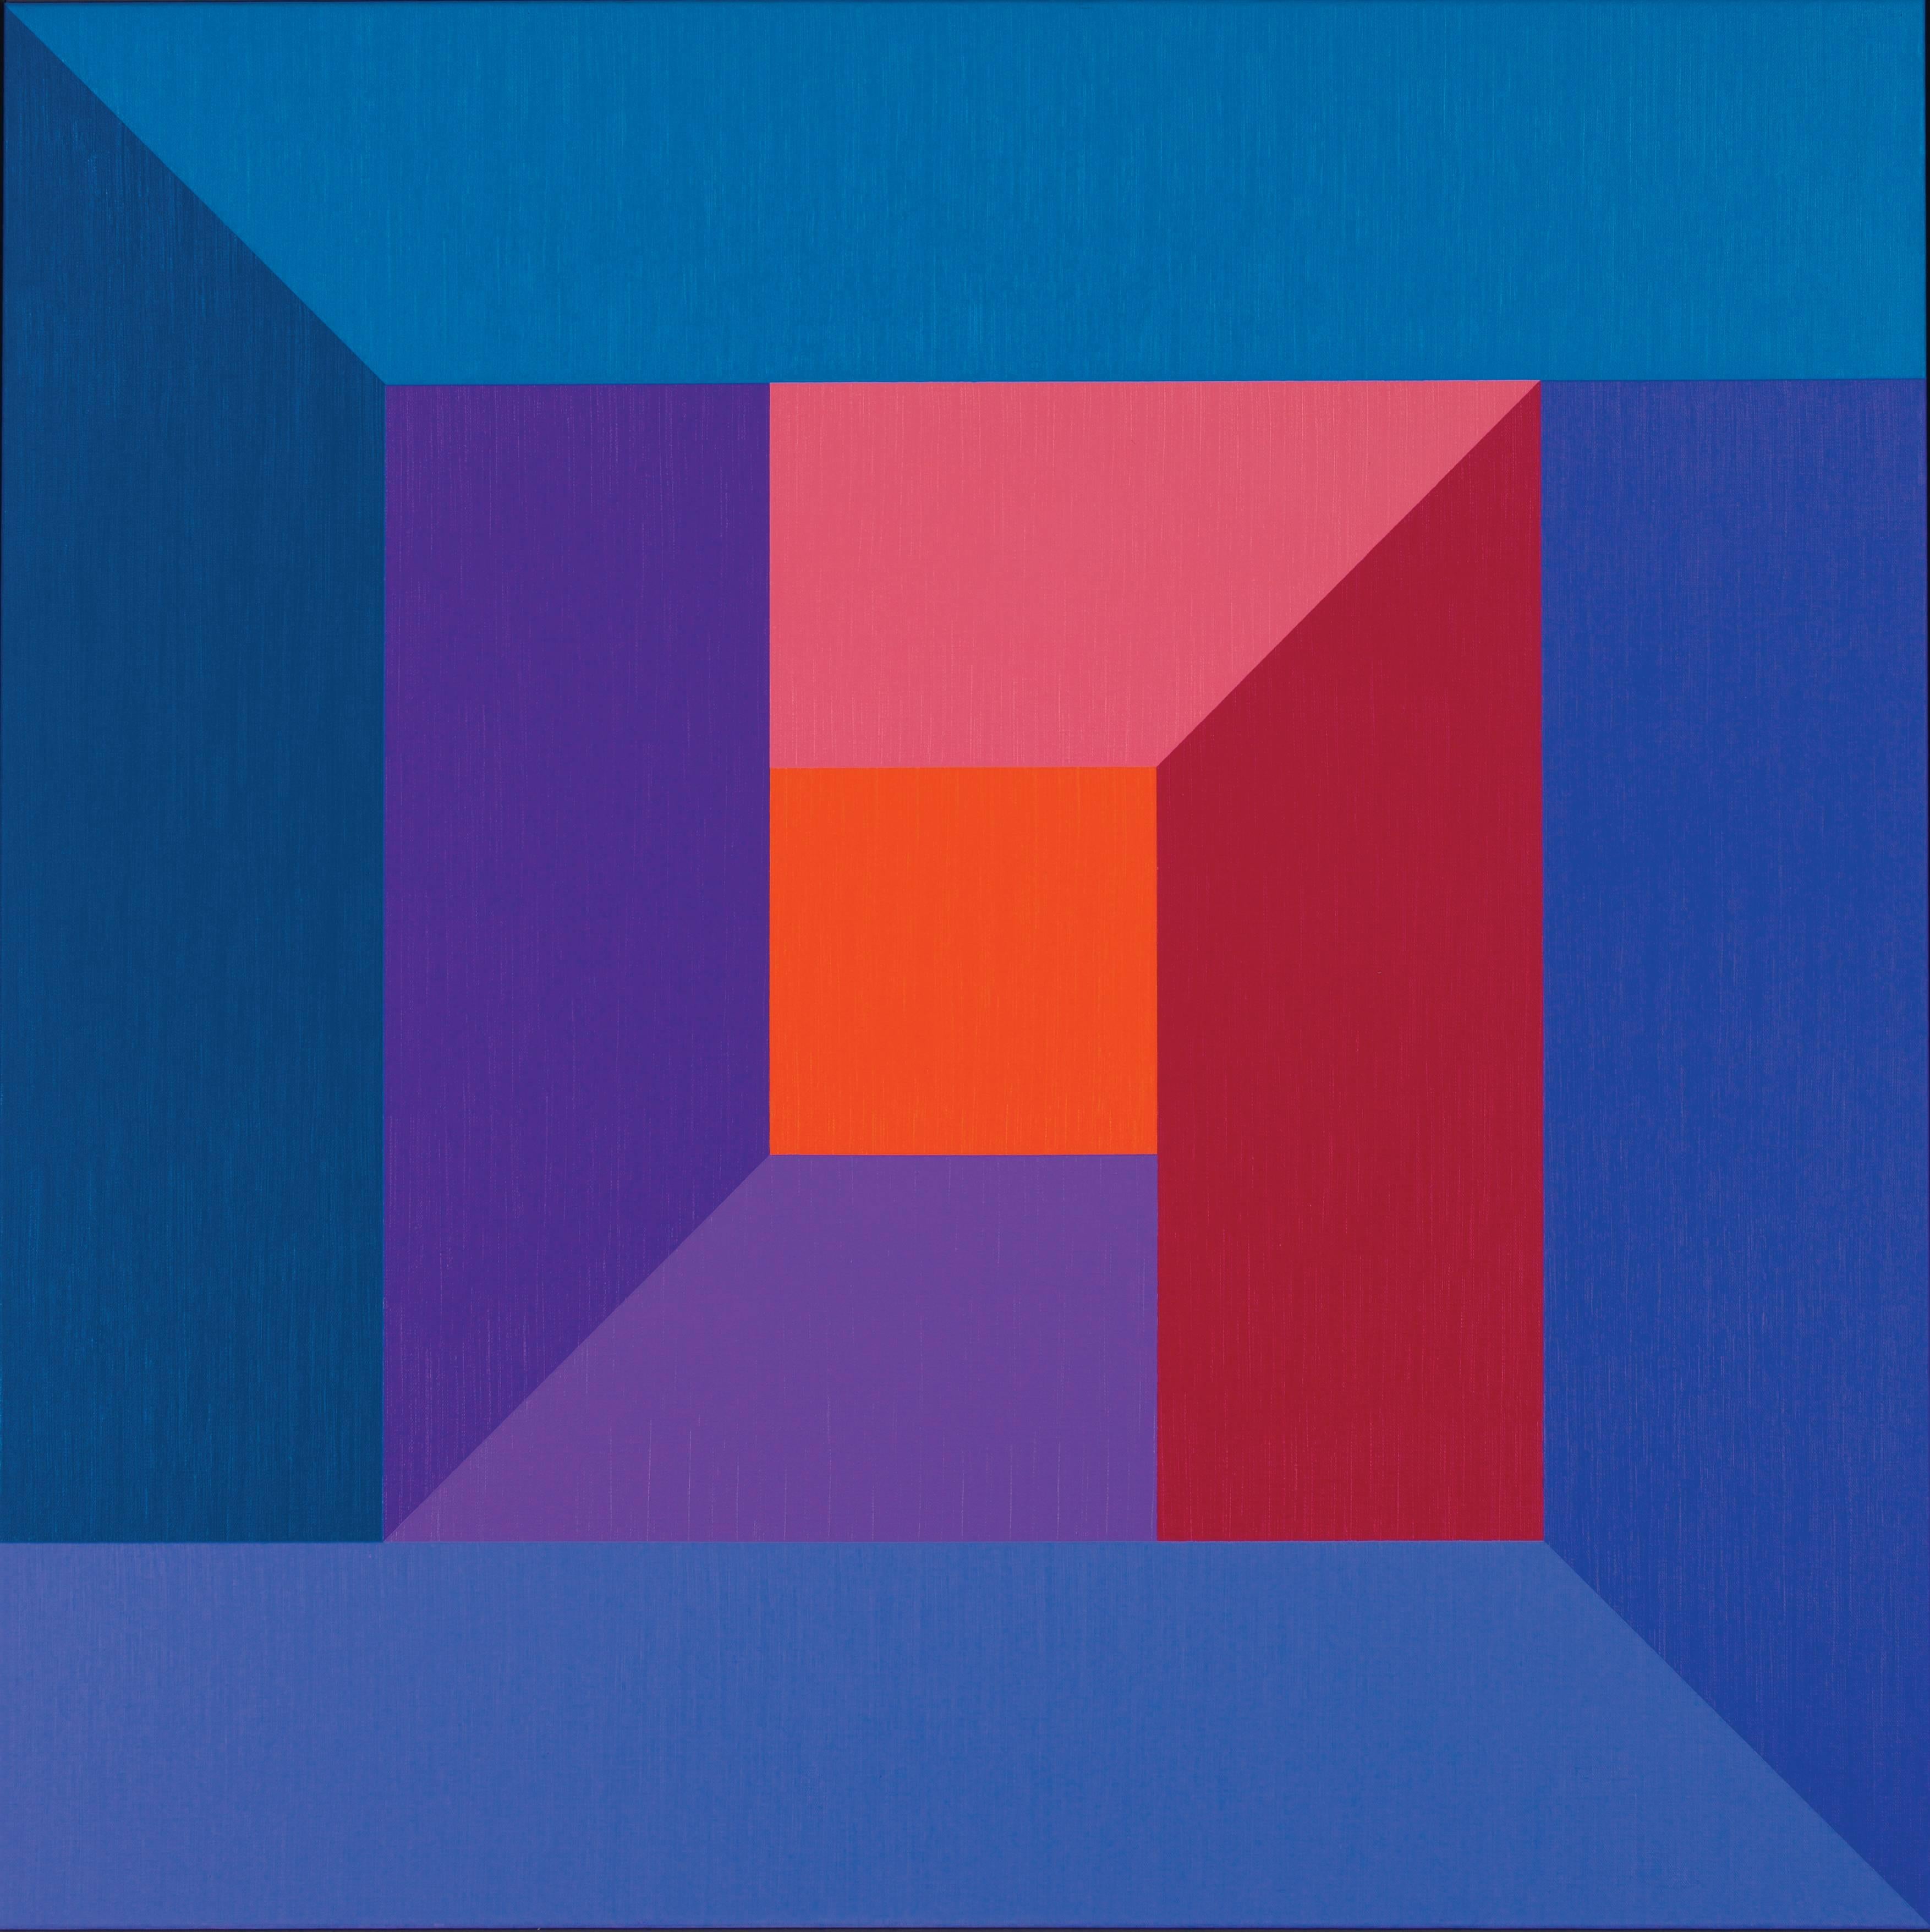 Karl Benjamin Abstract Painting - #7, original oil painting with blue, purple, red, pink and orange color squares 